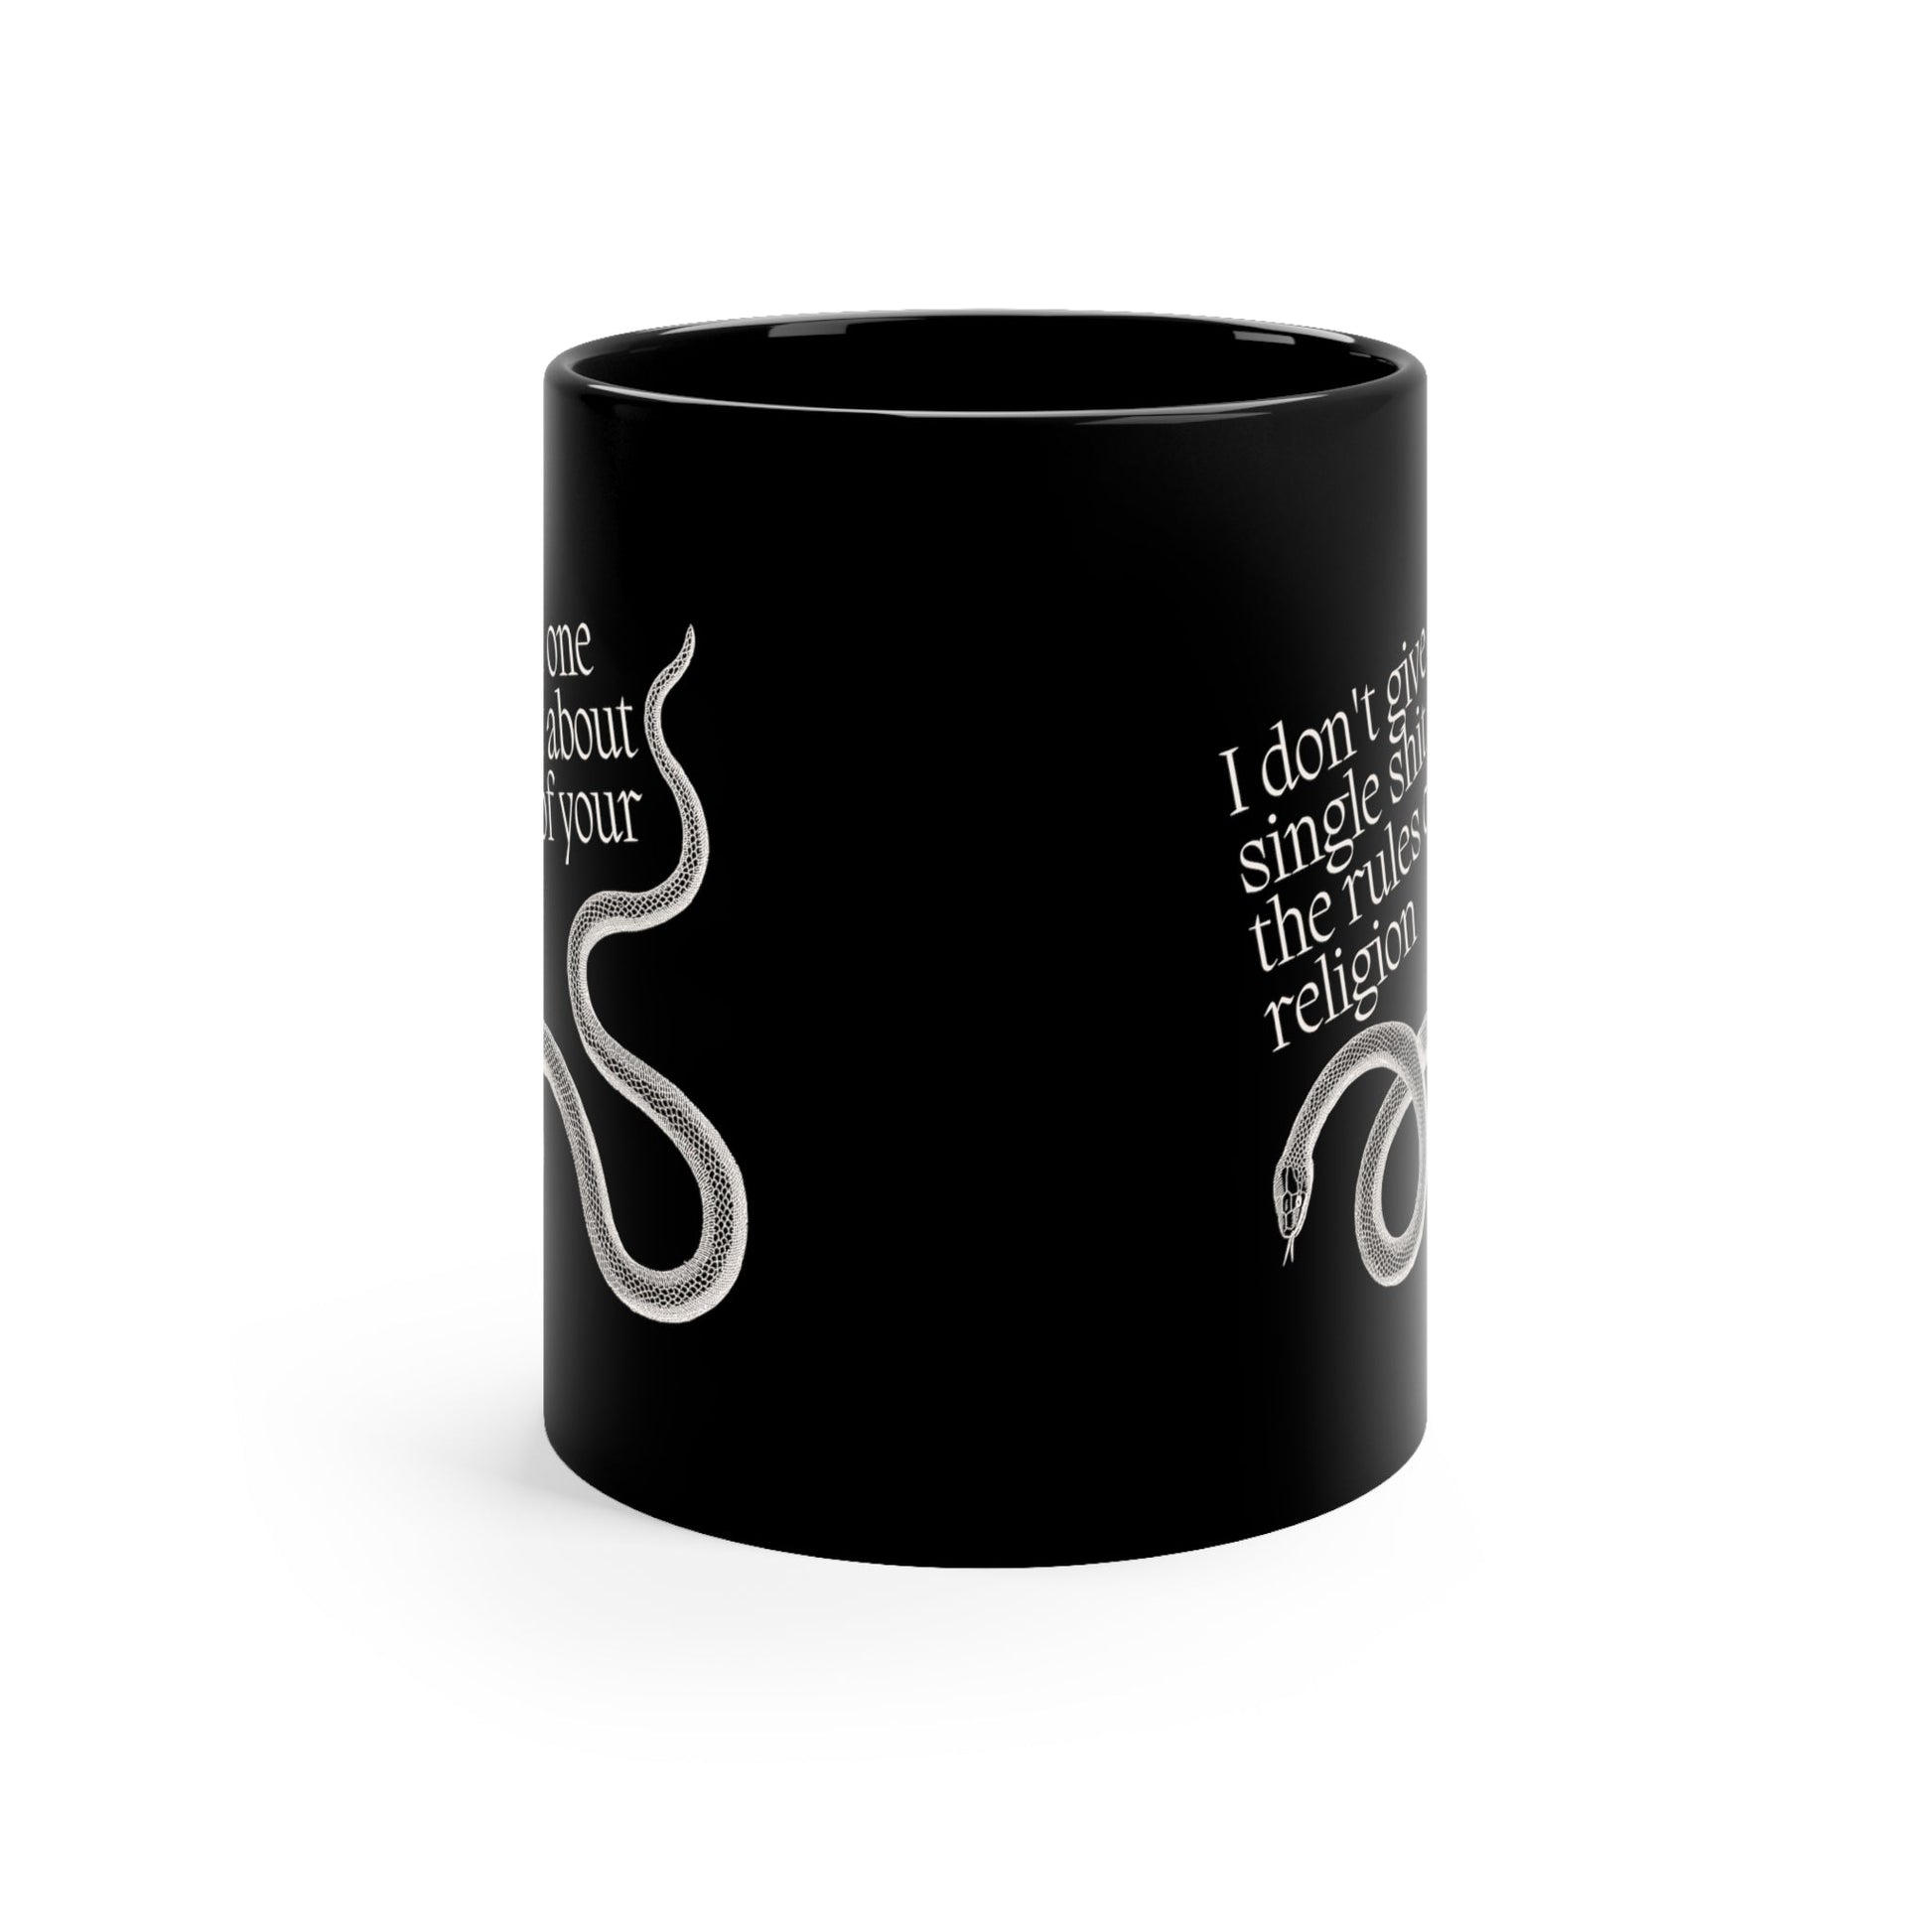 I Don't Give One Single Shit About the Rules of Your Religion Snake Mug in Black